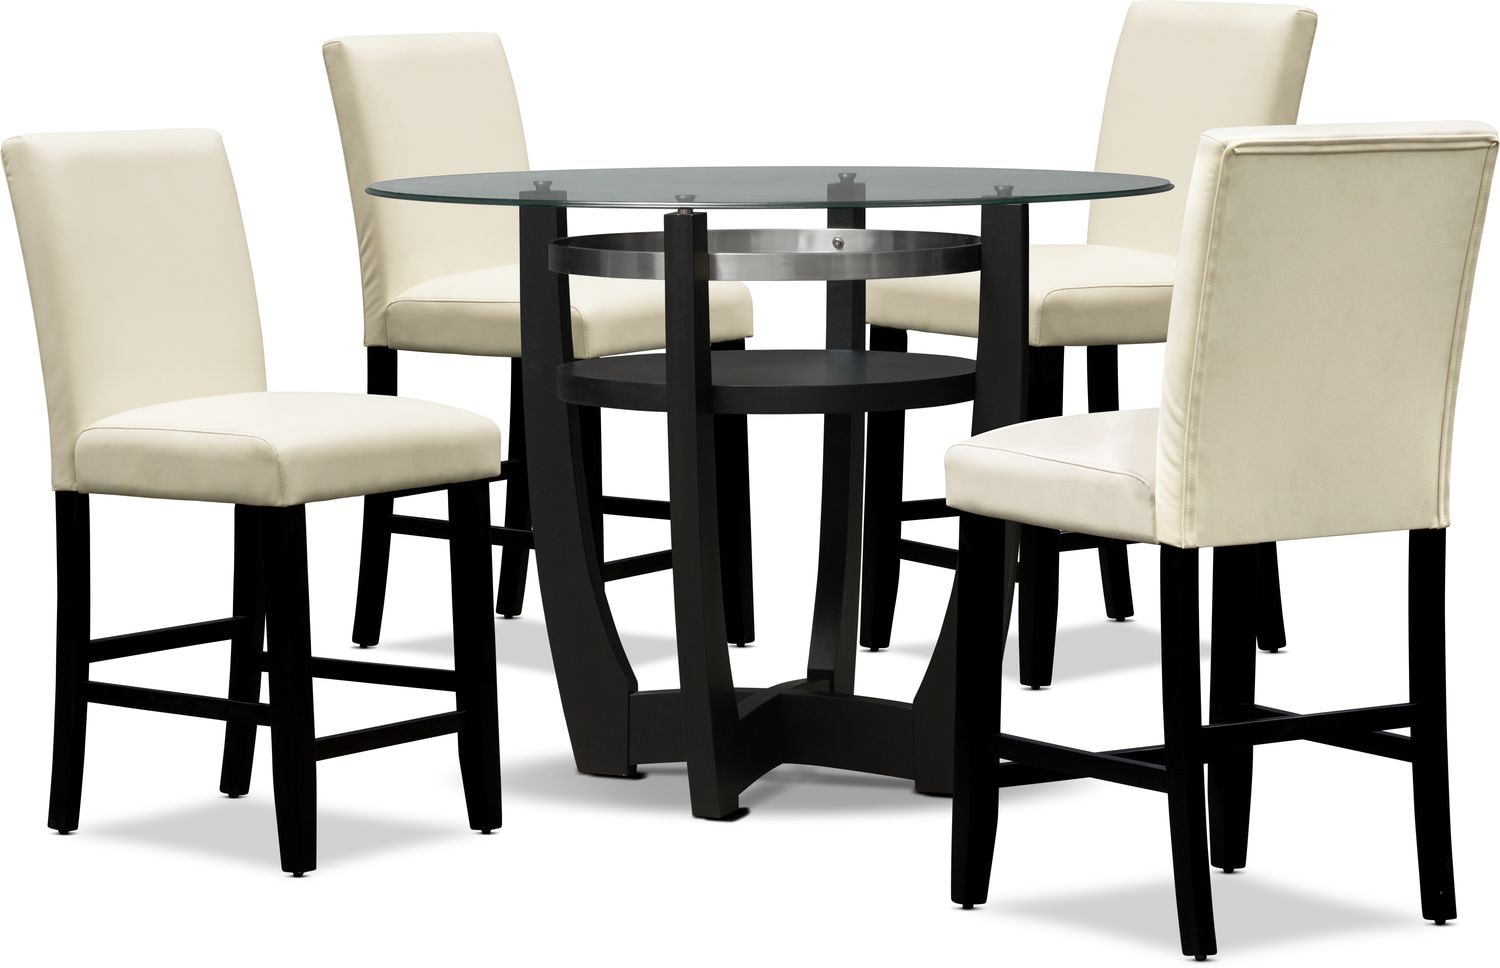 Lennox Counter Height Dining Table And 4 Stools Value City Furniture